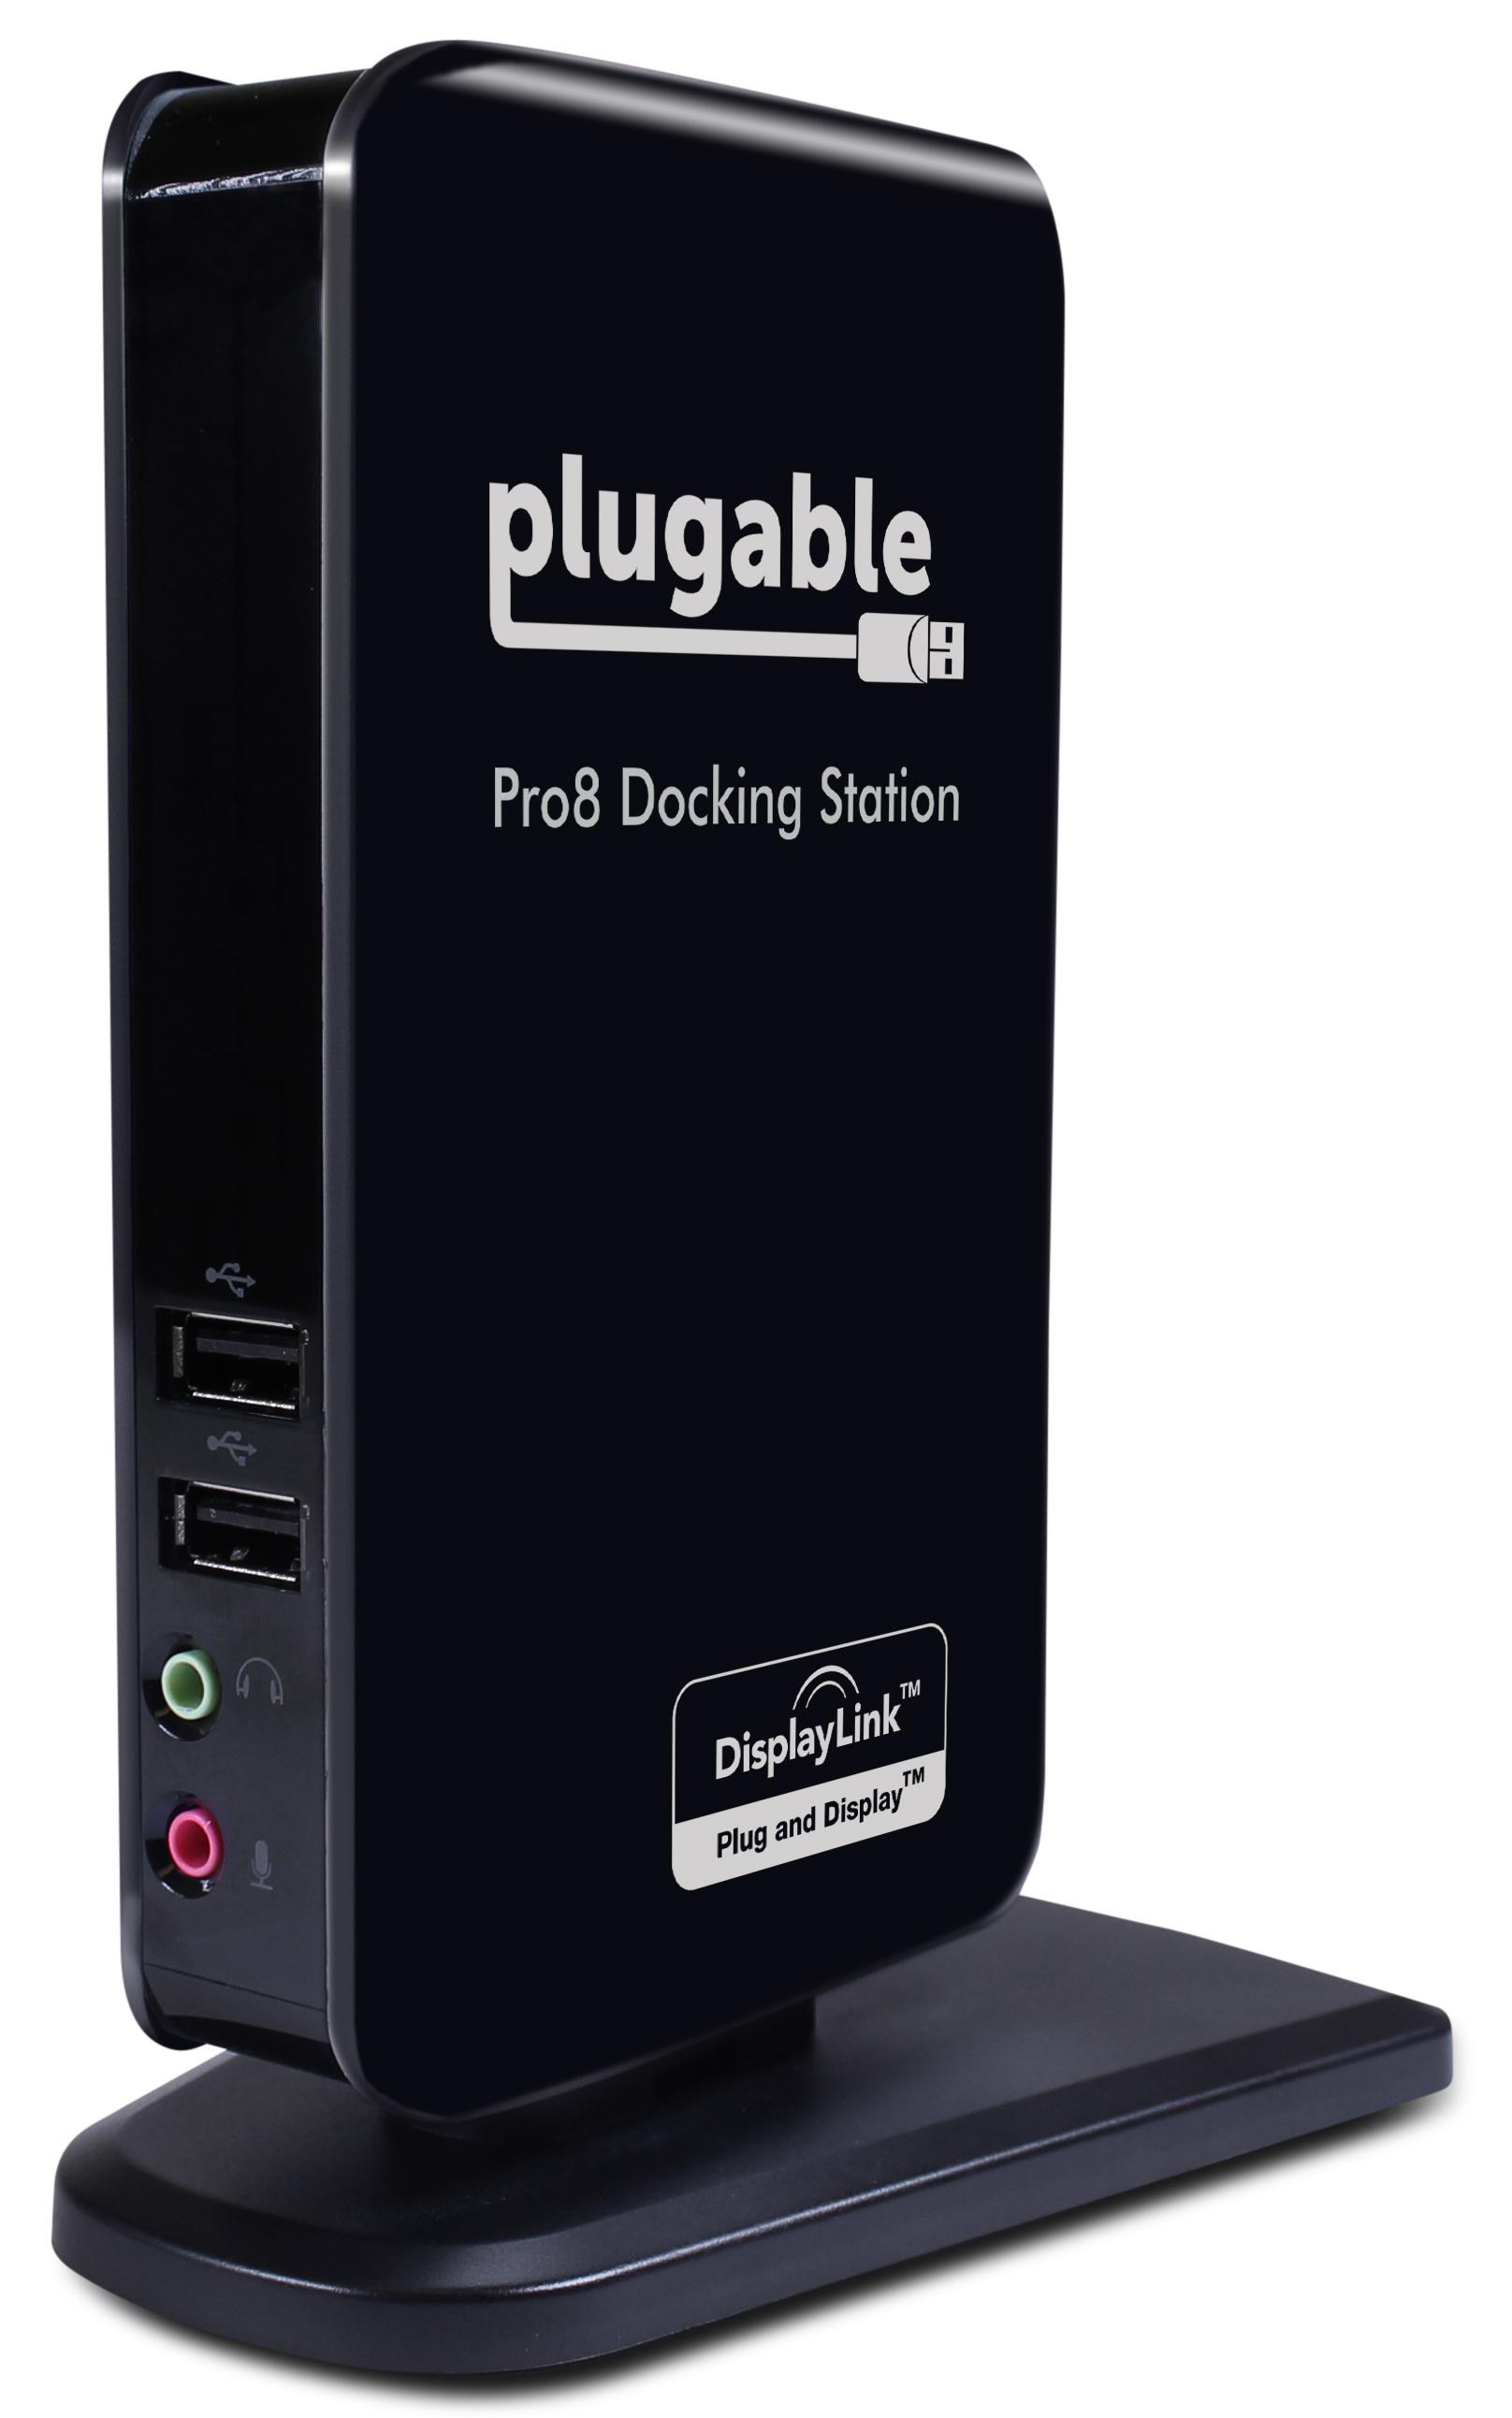 Plugable Pro8 Charging & USB Docking Station for Select Windows Tablets - Simultaneously Charges & Adds Extended Display Output, 3.5mm Audio In/Out, 10/100 Ethernet, and 4 2.0 USB Ports. - image 5 of 7